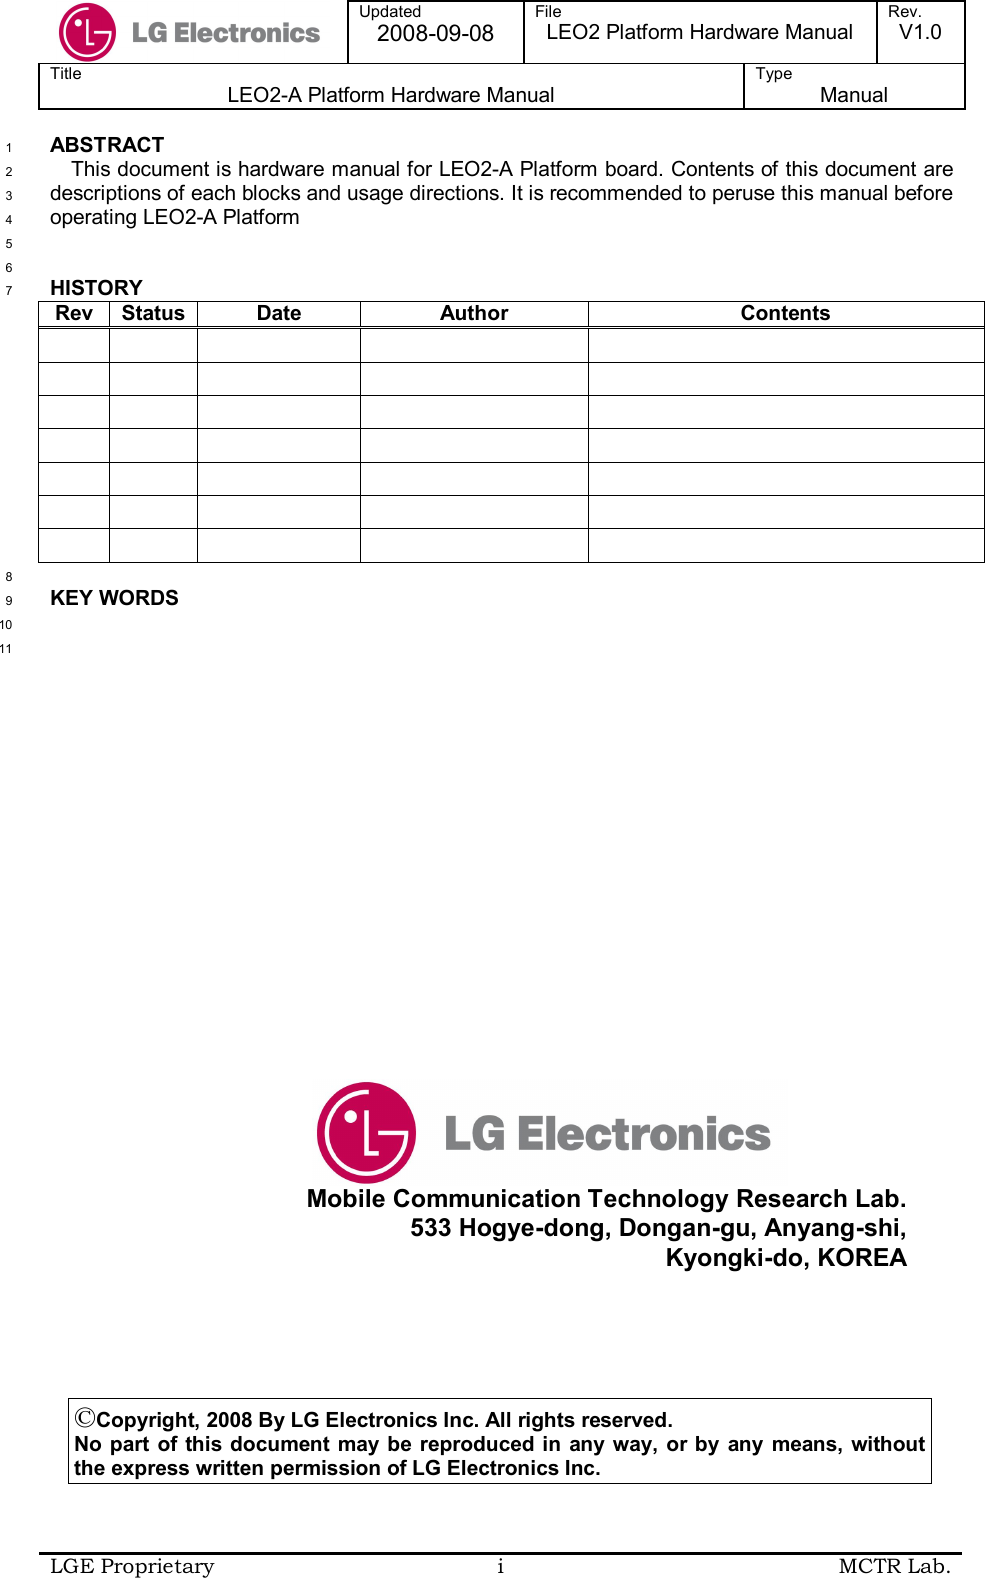  Updated 2008-09-08 File LEO2 Platform Hardware Manual Rev. V1.0 Title LEO2-A Platform Hardware Manual Type  Manual  LGE Proprietary  i  MCTR Lab.  ABSTRACT 1 This document is hardware manual for LEO2-A Platform board. Contents of this document are 2 descriptions of each blocks and usage directions. It is recommended to peruse this manual before 3 operating LEO2-A Platform 4  5  6 HISTORY 7 Rev Status Date  Author  Contents                                                                 8 KEY WORDS 9  10  11 ©Copyright, 2008 By LG Electronics Inc. All rights reserved. No part  of this  document may be  reproduced in  any way, or by  any means,  without the express written permission of LG Electronics Inc.   Mobile Communication Technology Research Lab. 533 Hogye-dong, Dongan-gu, Anyang-shi, Kyongki-do, KOREA 